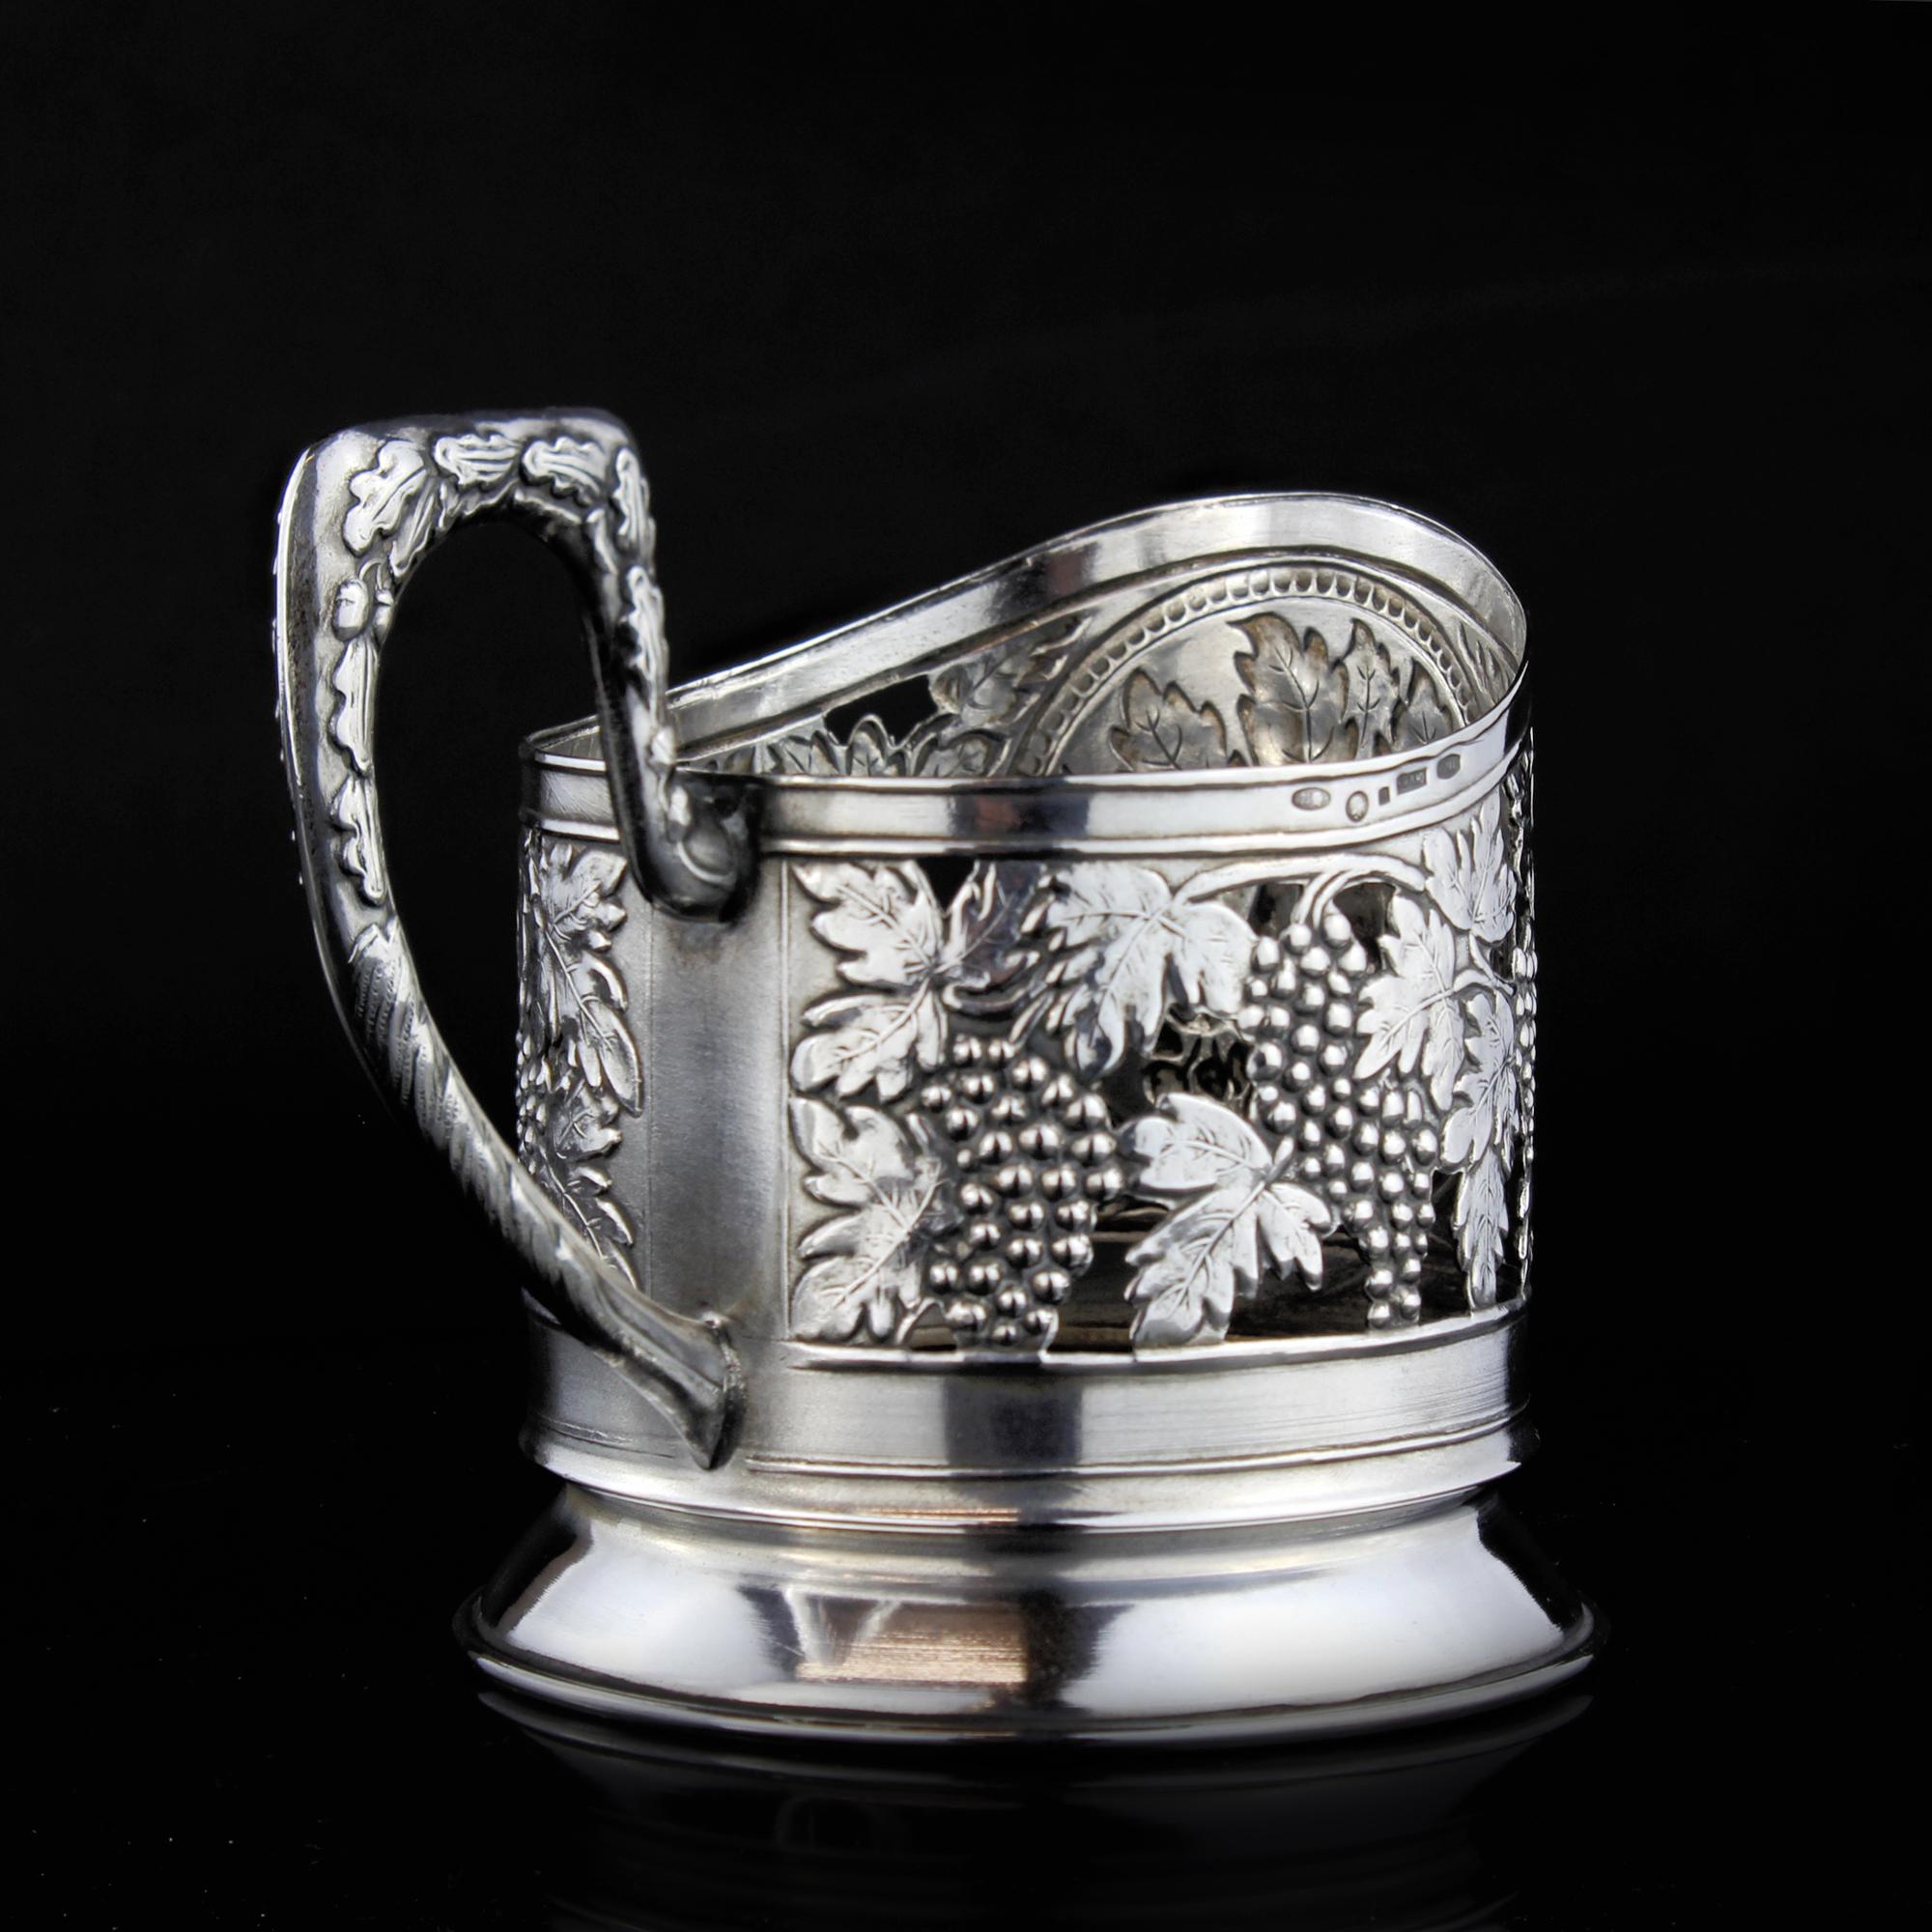 Vintage Soviet Union Silver Tea Glass Holder In Good Condition For Sale In Braintree, GB